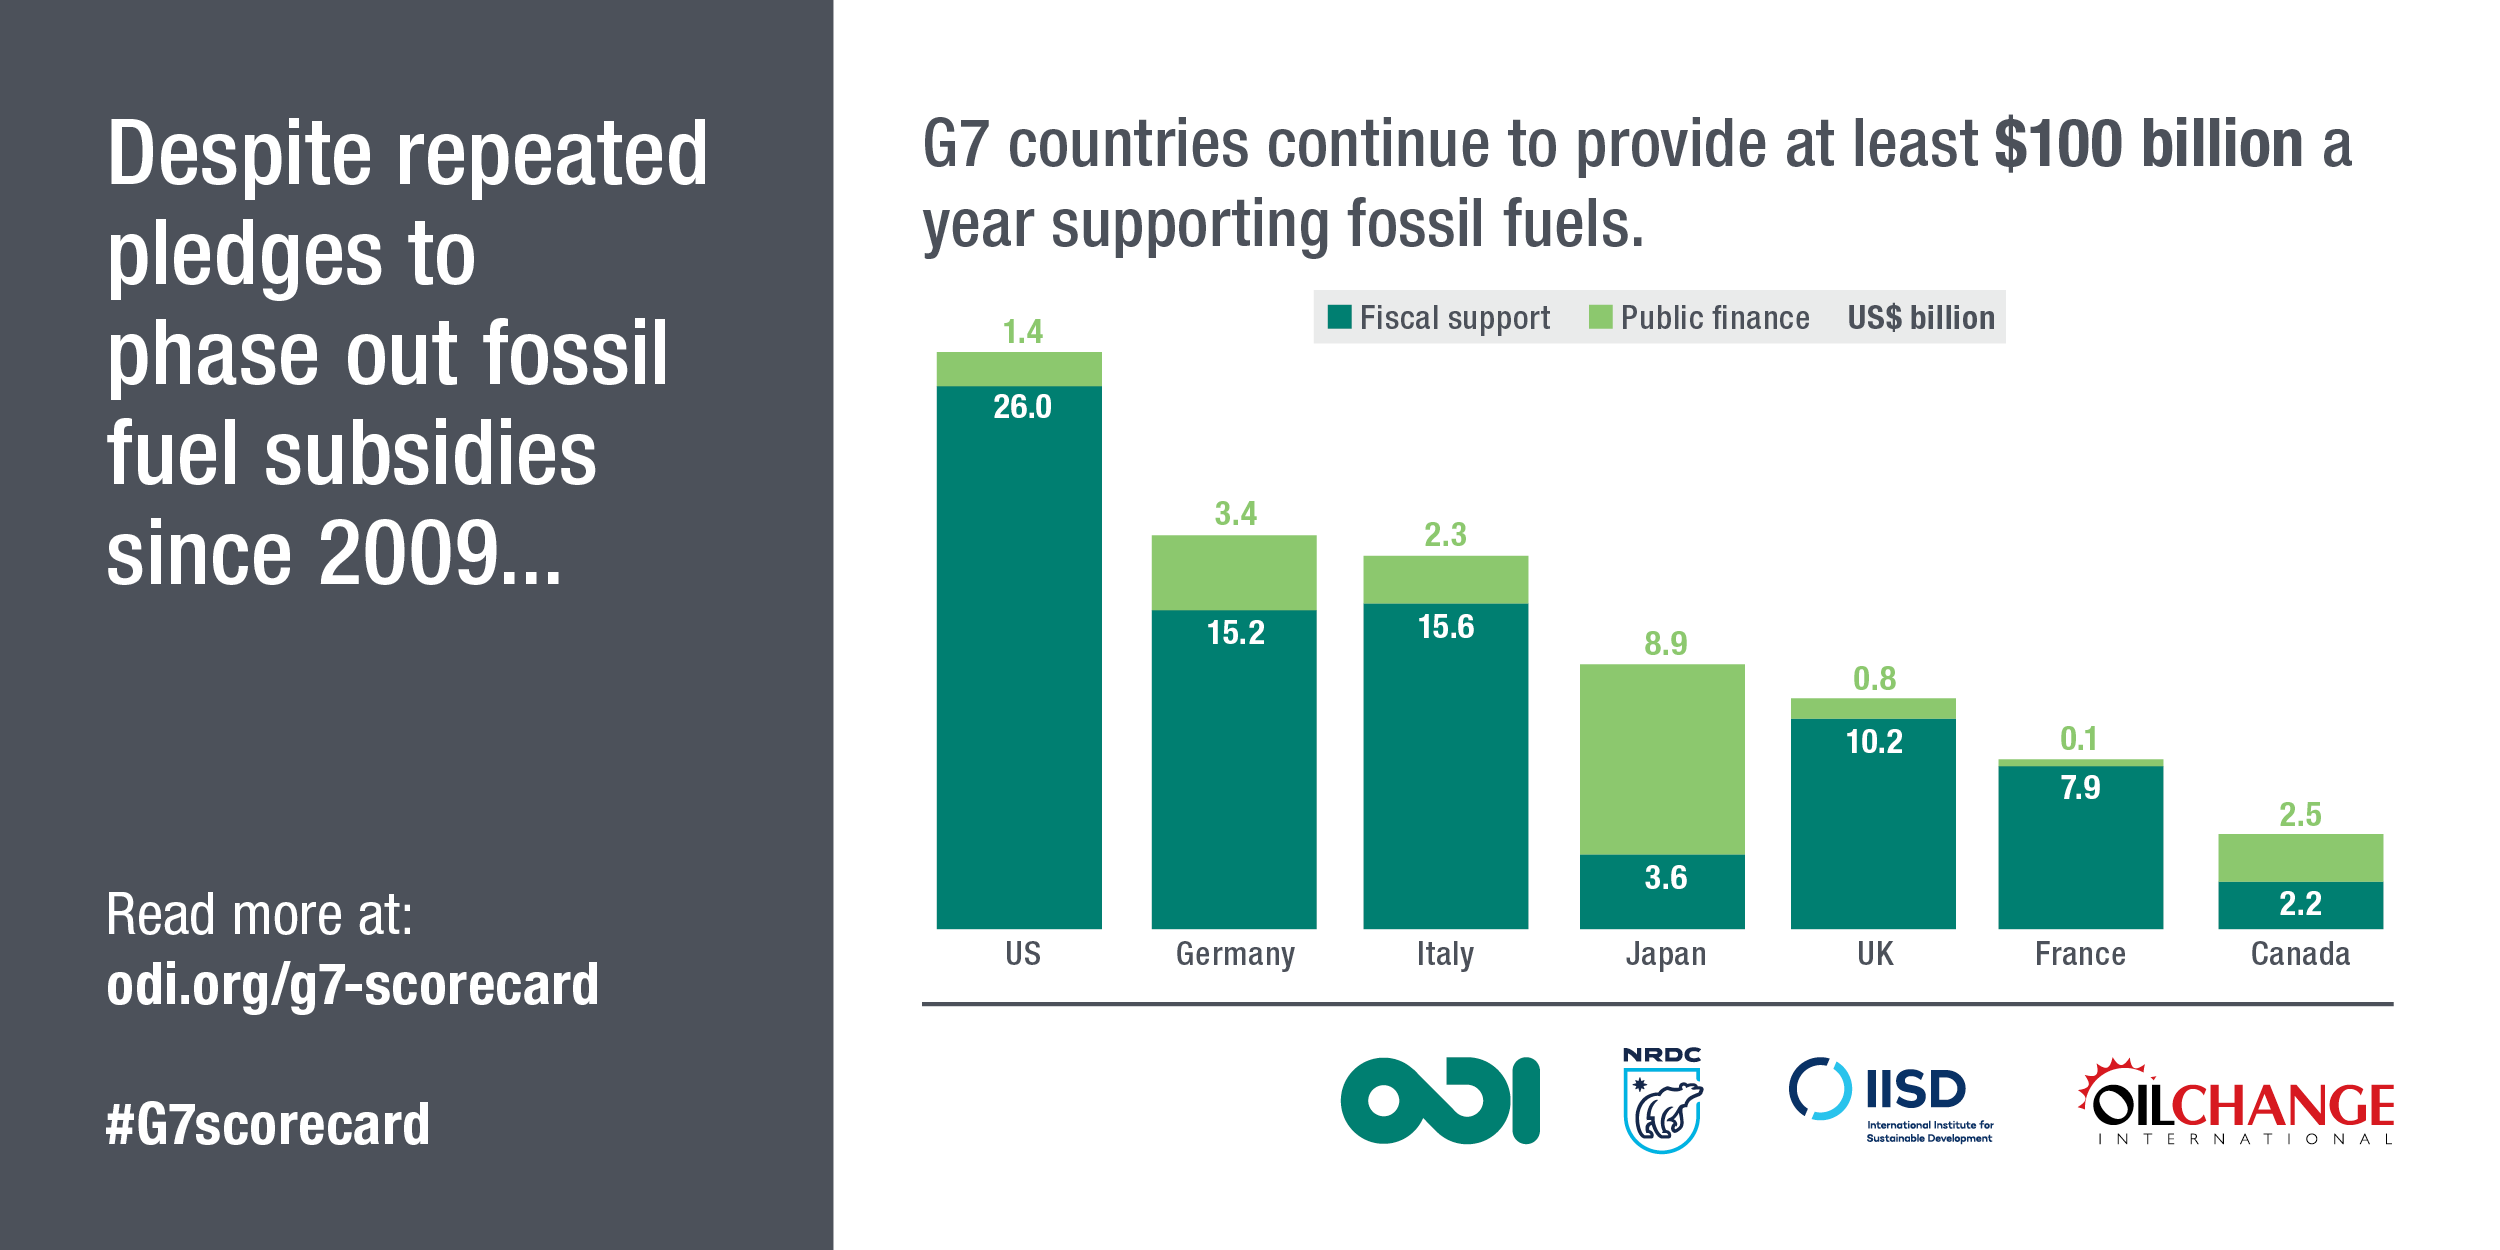 Infographic showing G7 support to fossil fuels up to $100 billion